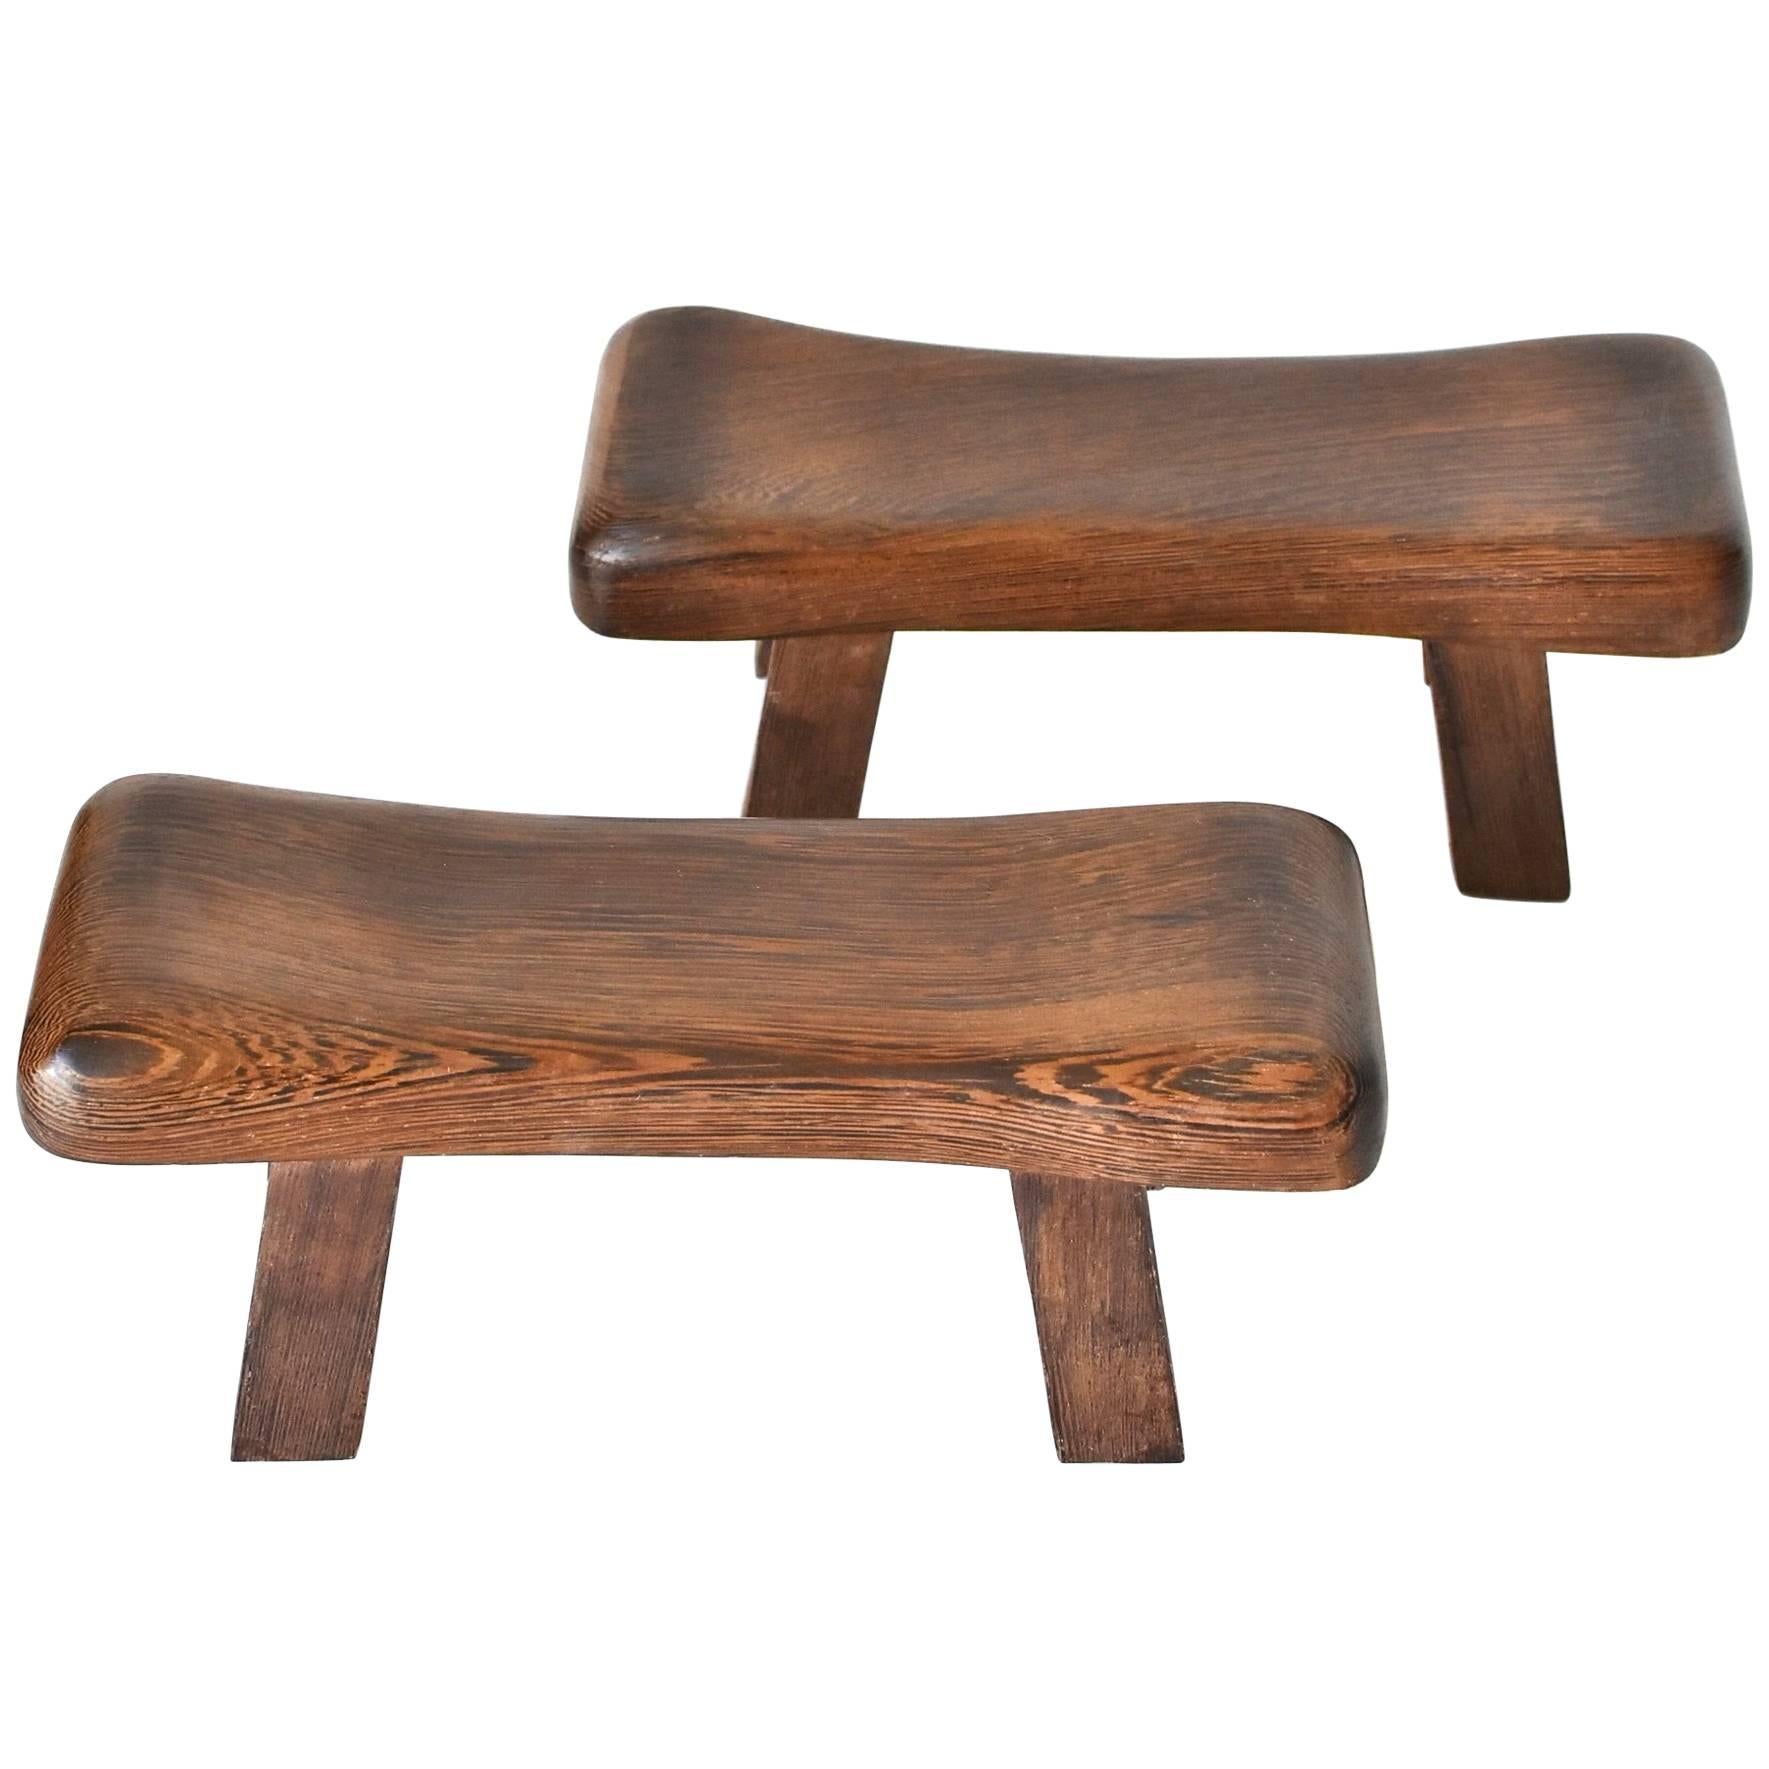 Pair of Wenge Wood Mini Stools, Headrests, Stands